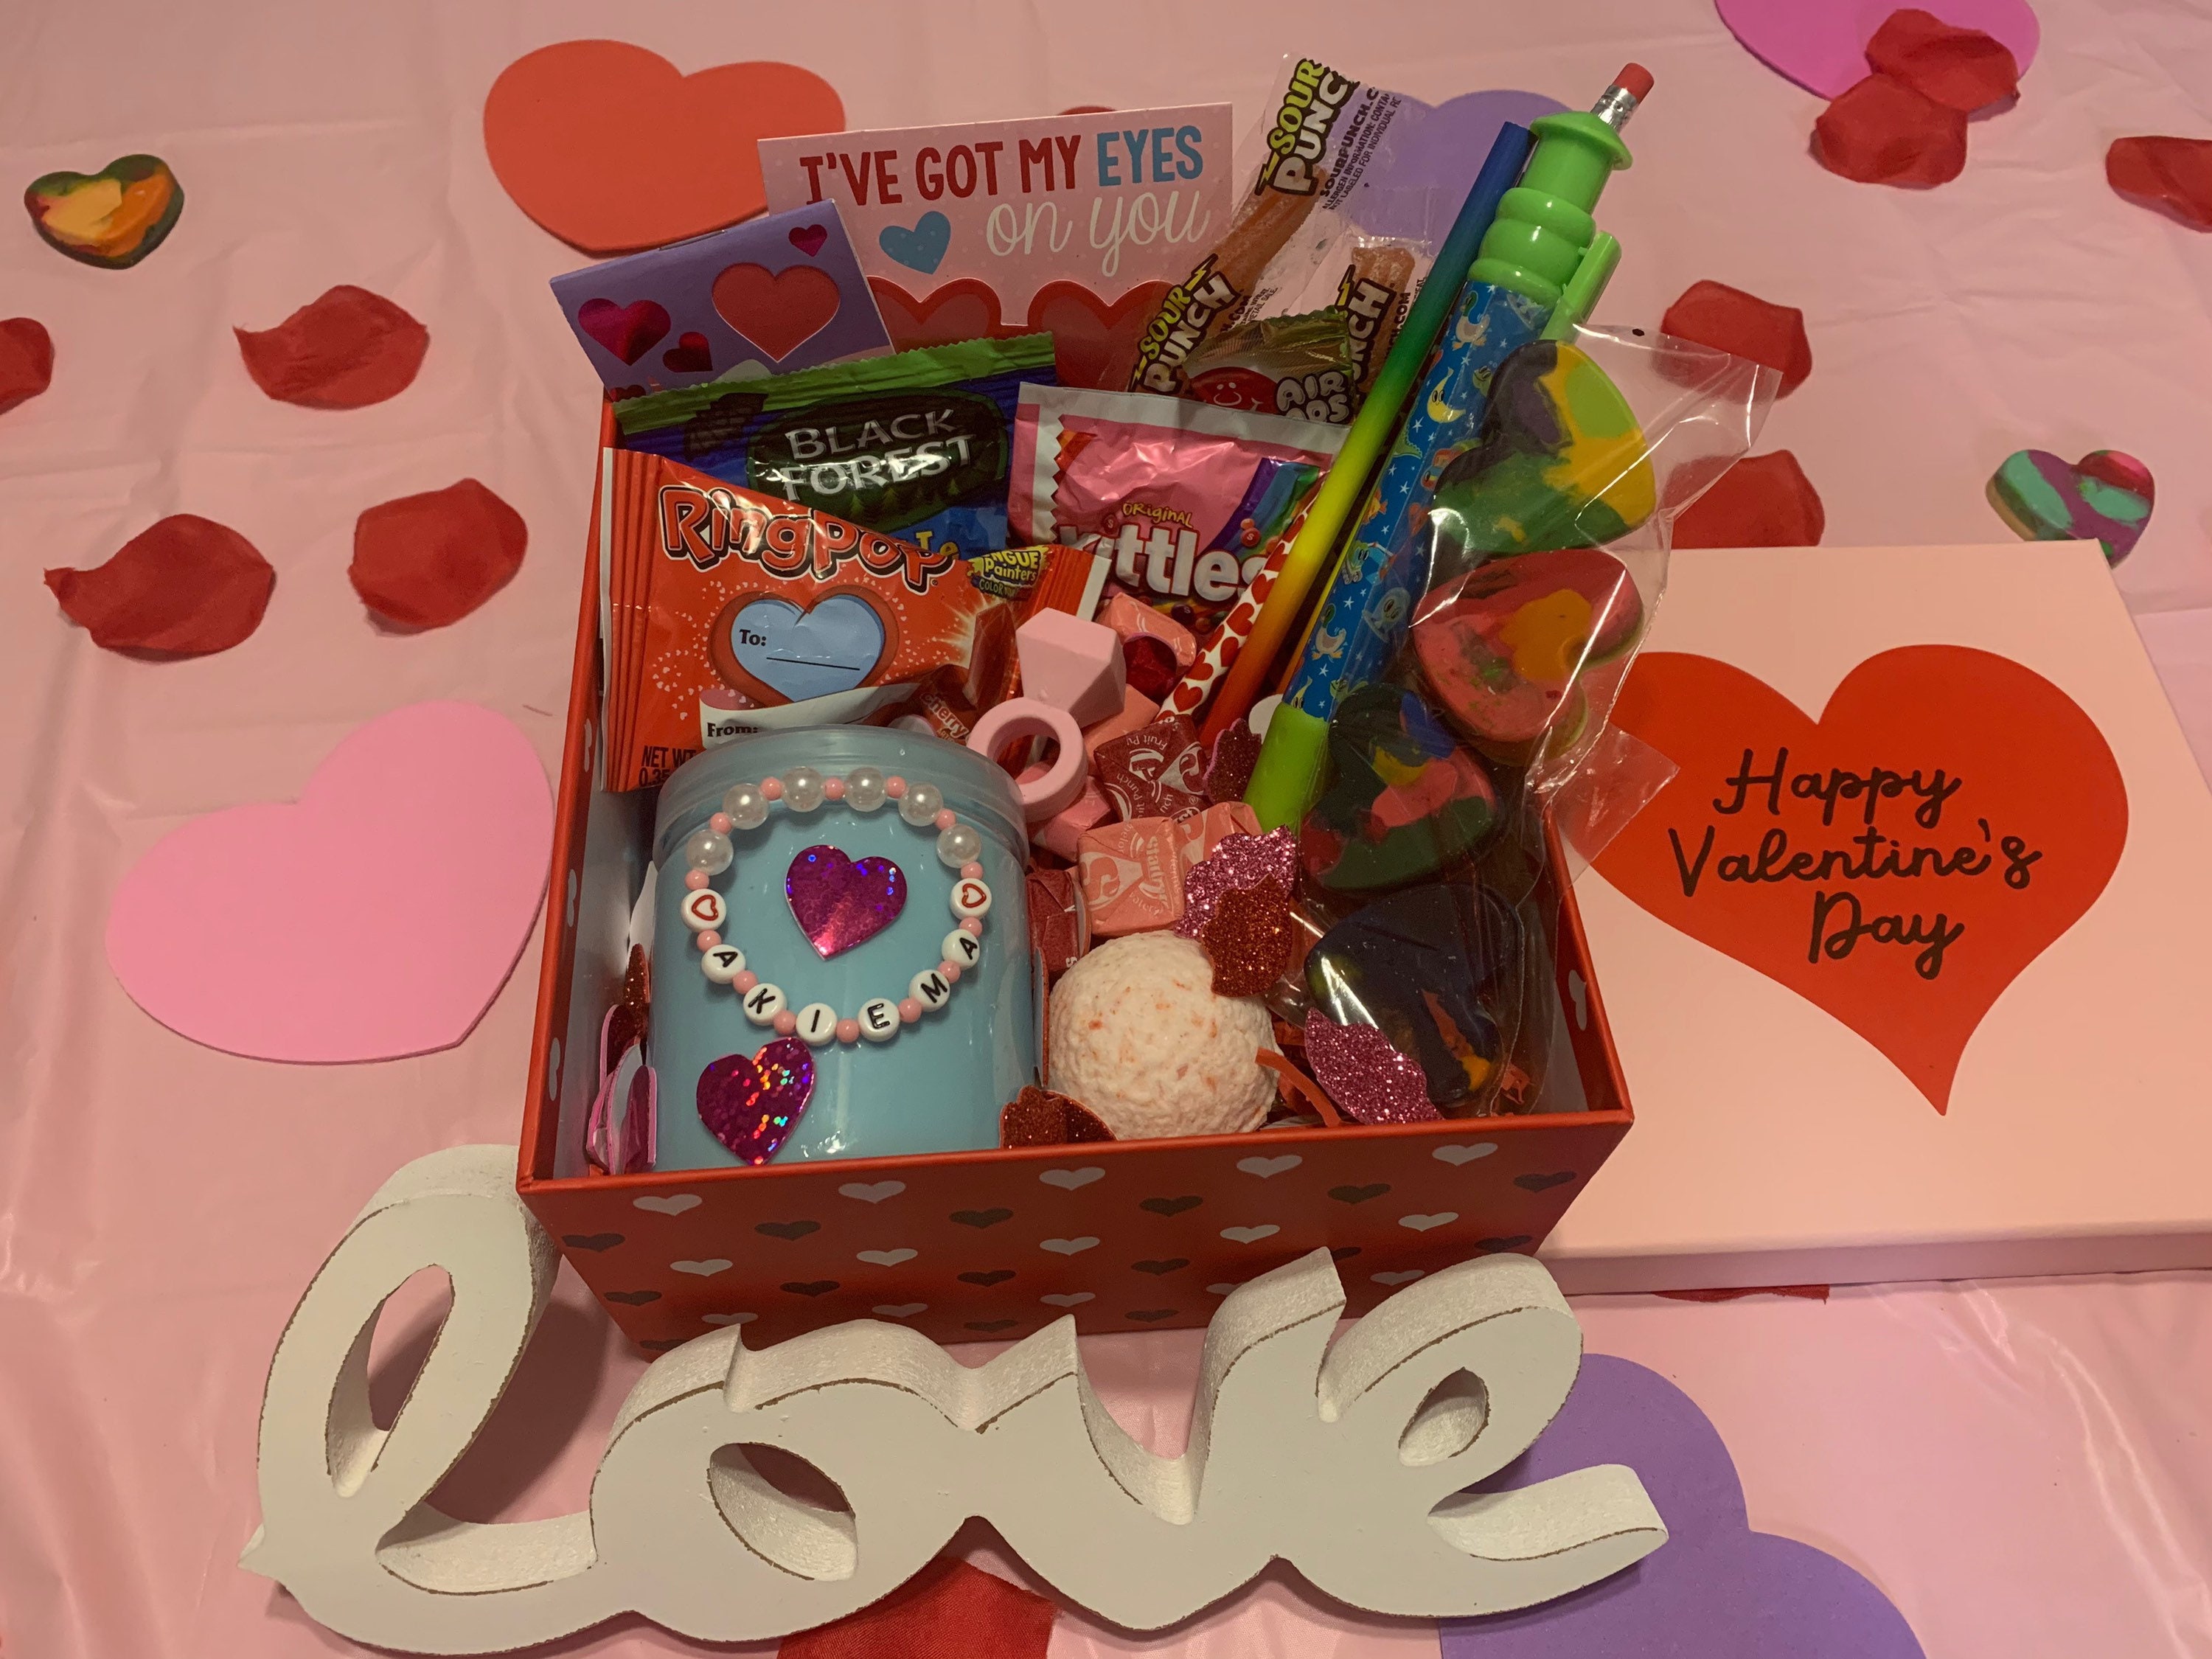 Valentines Basket - Valentine's Gifts For Kids - Fun with Mama